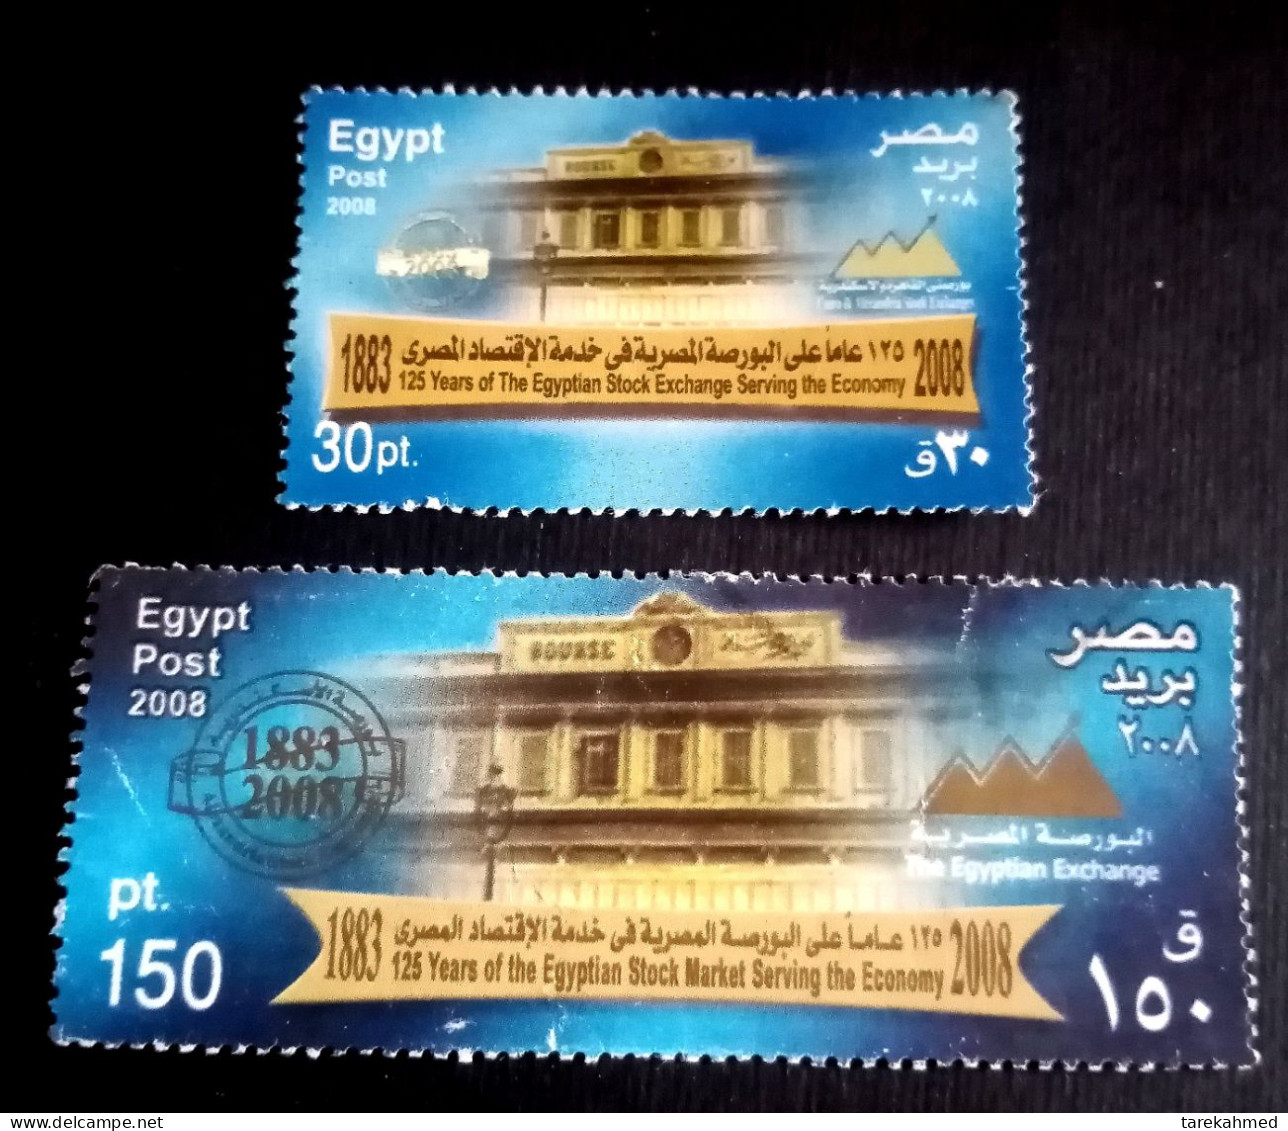 EGYPT. 2008 , Complete Used Set Of The 125th Anniv. OF EGYPTIAN STOCK EXCHANGE SERVING THE ECONOMY , VF - Gebruikt